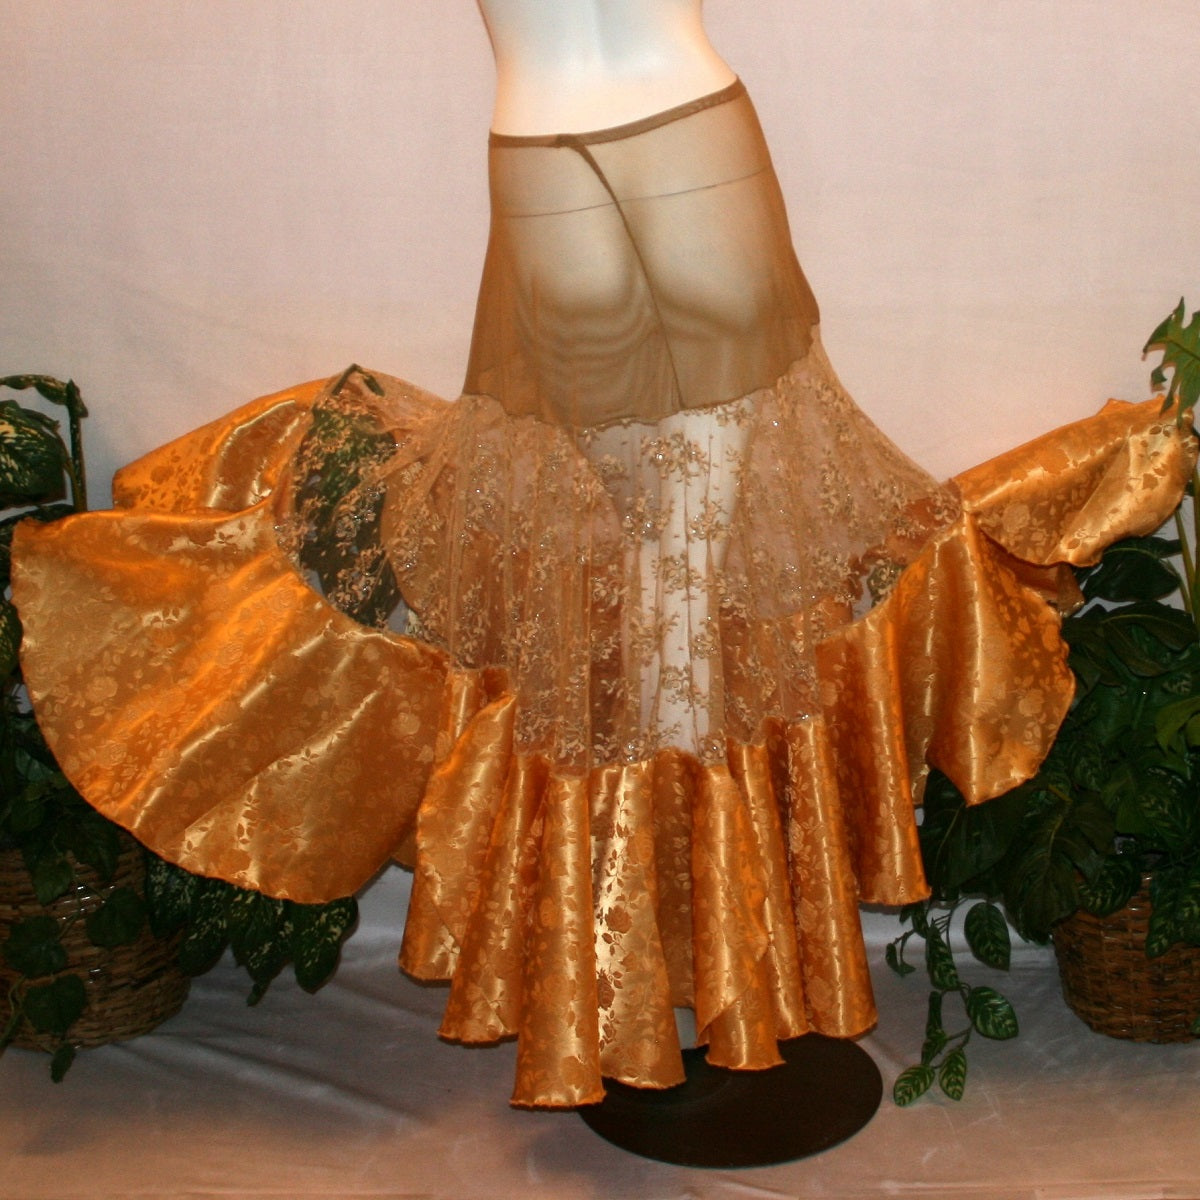 back view of Ballroom skirt created on a nude illusion hip base of a gorgeous & delicate gold lace top flared section with gold brocade flounces at the bottom.